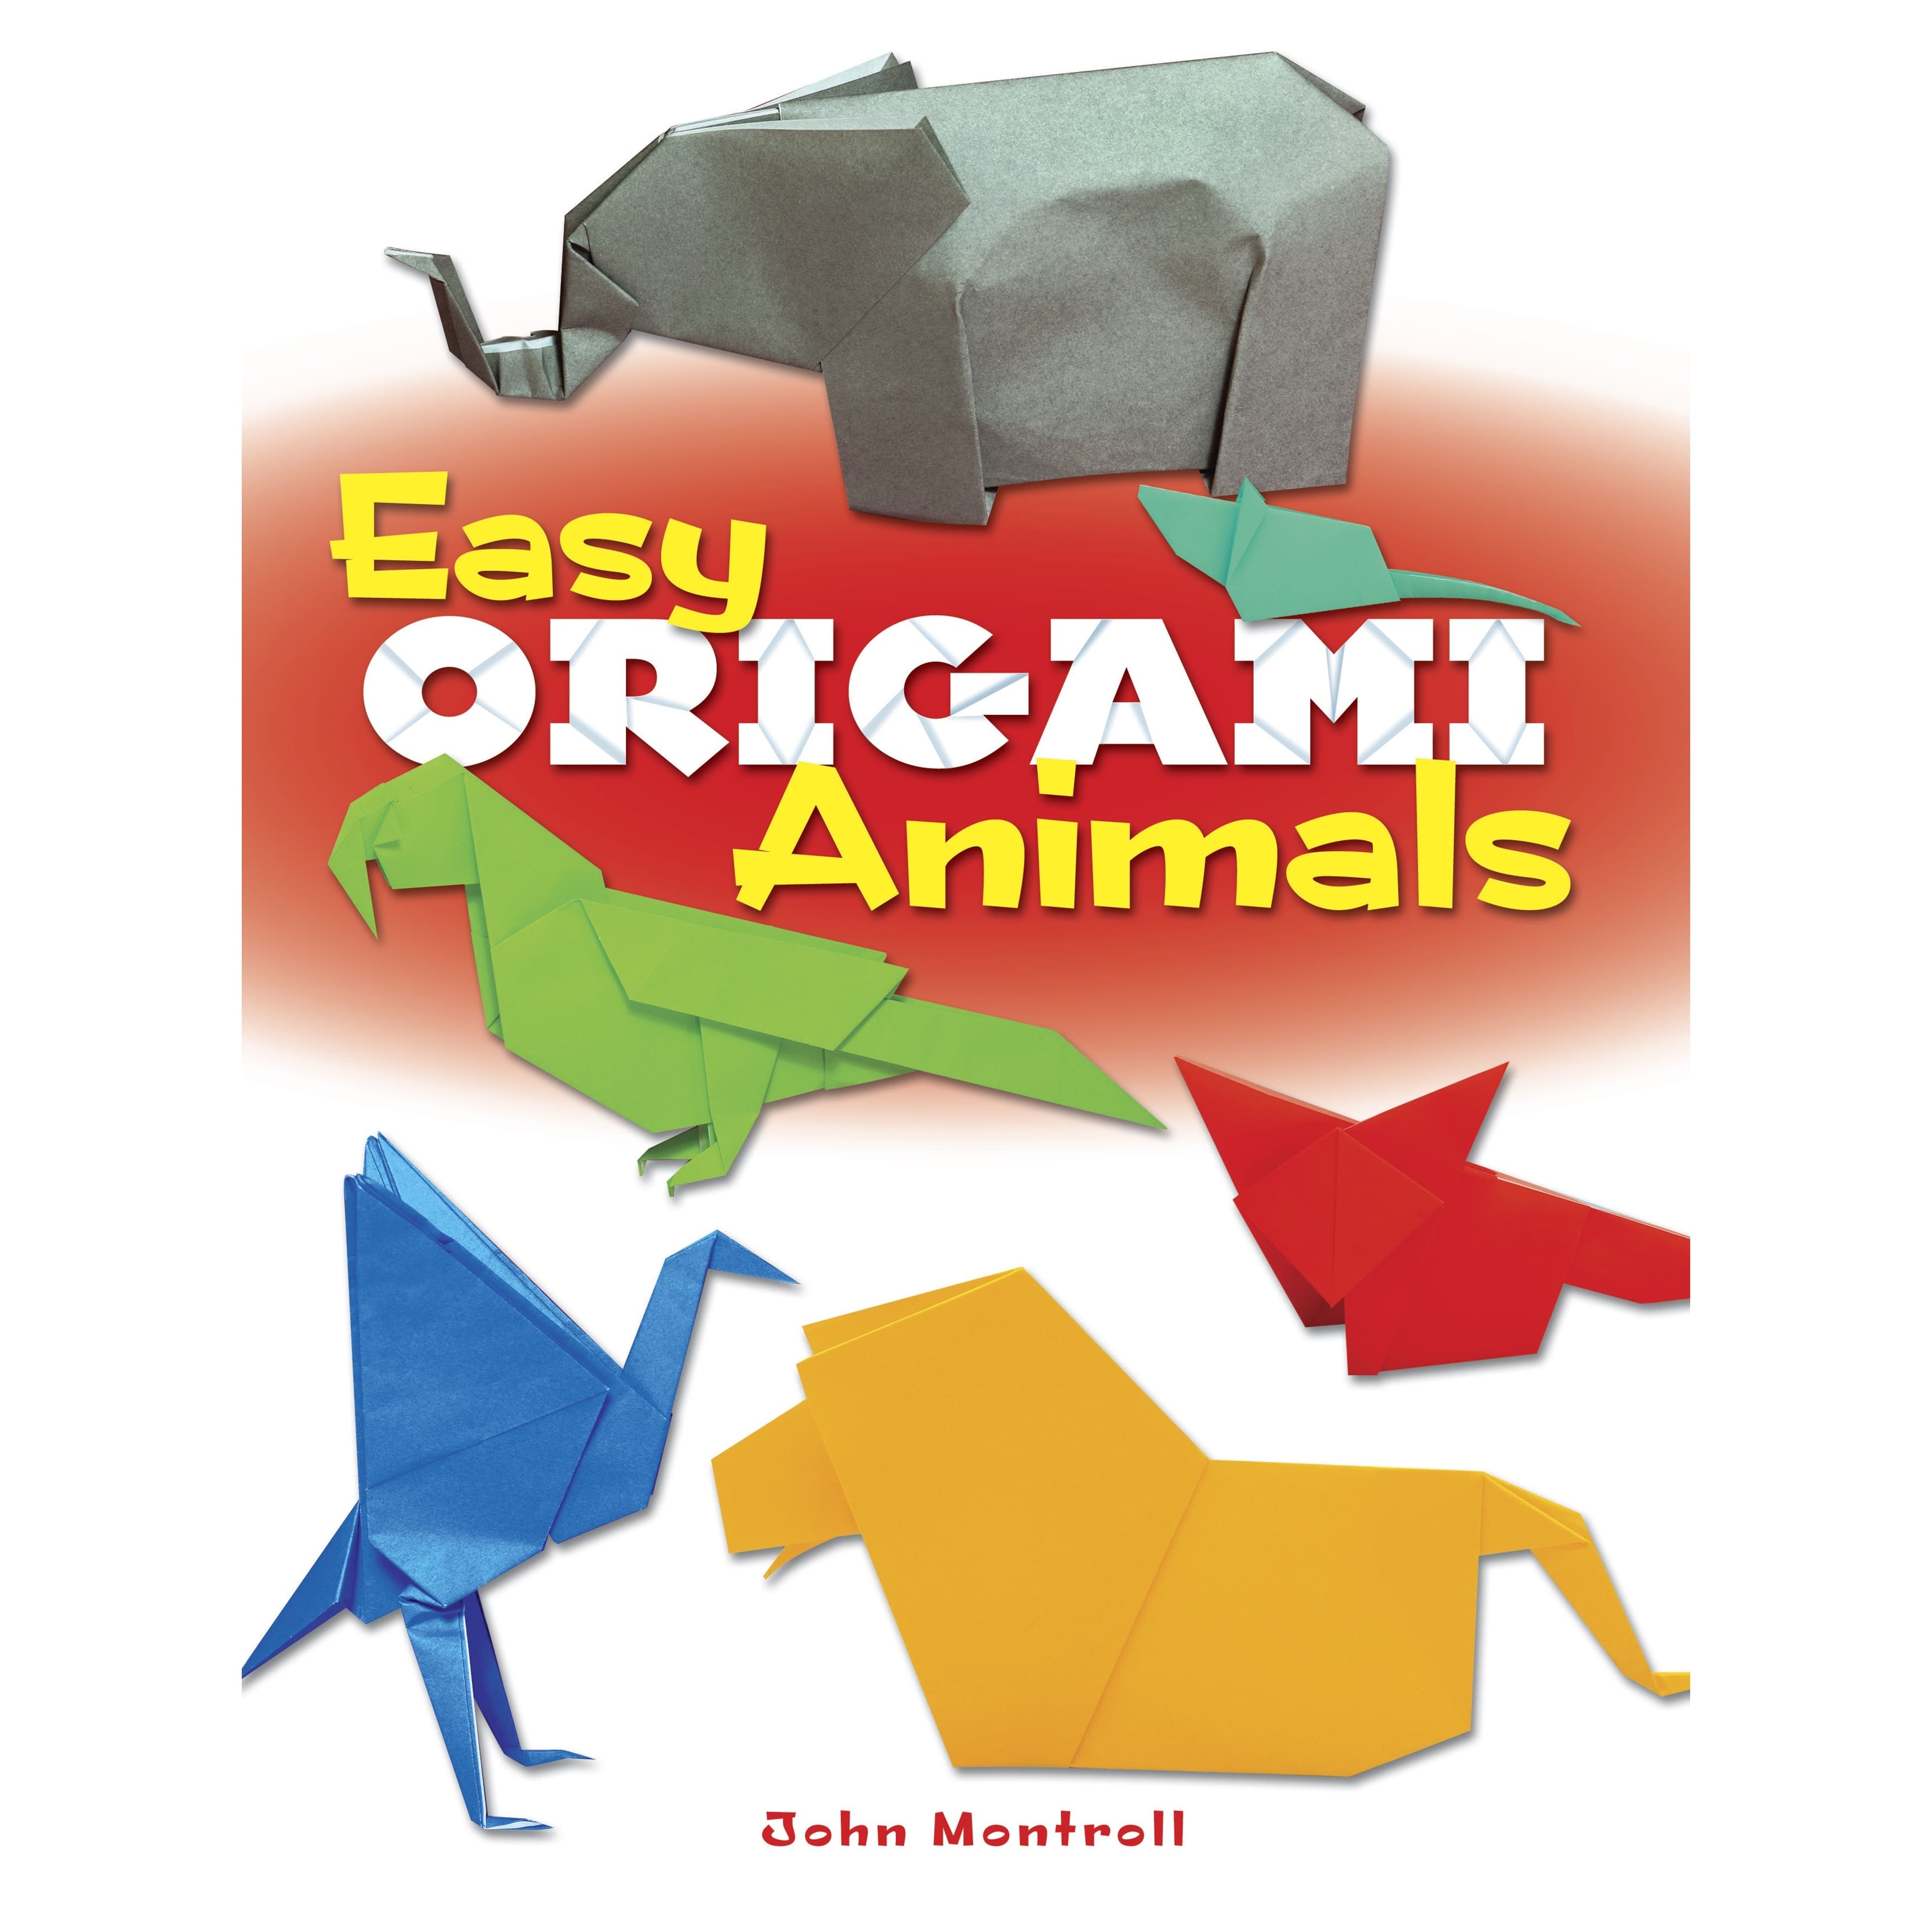 Origami Animals” Set — Book, Origami Paper, and a FREE Video Lesson